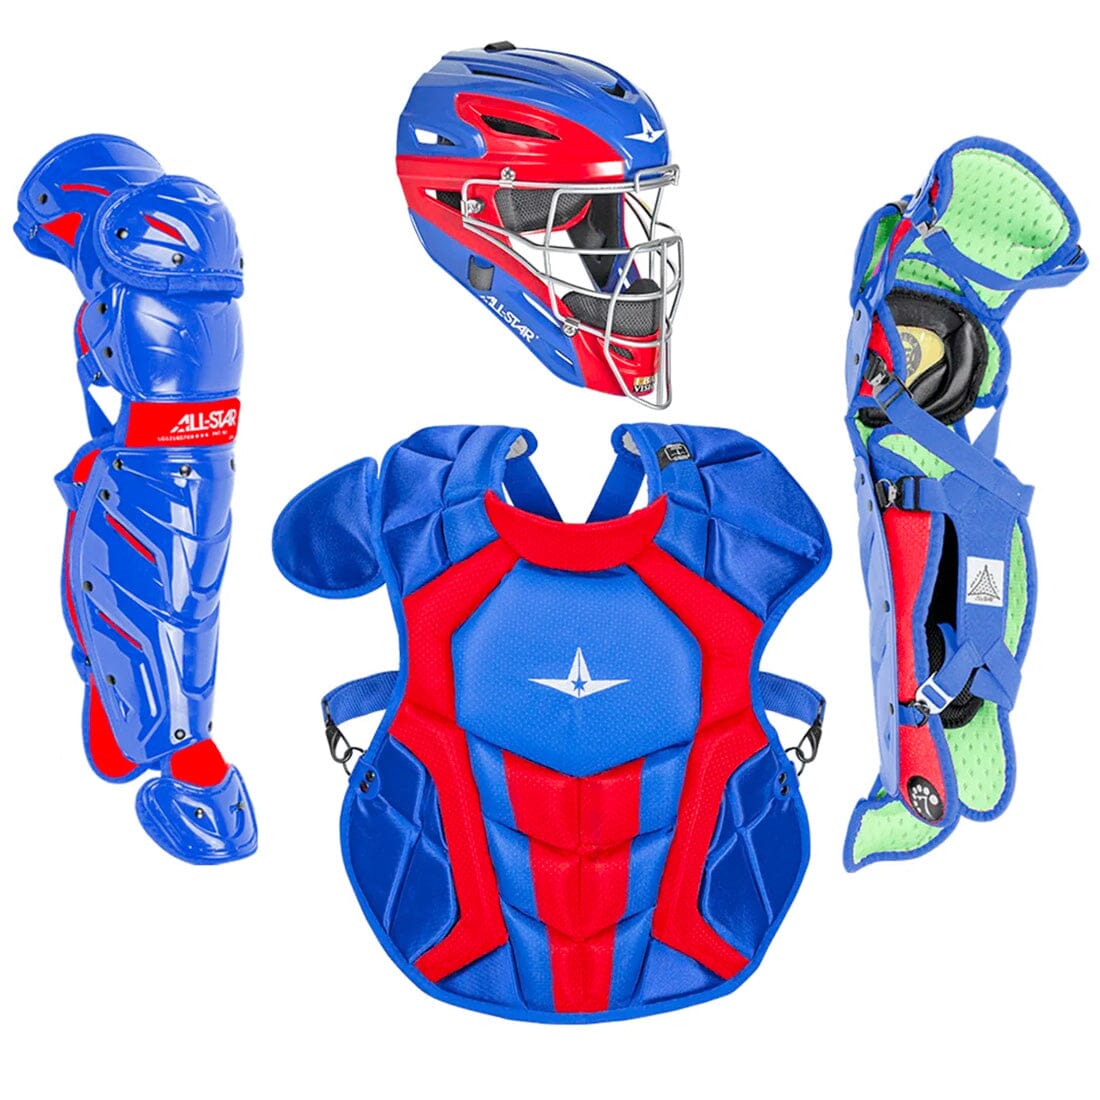 All-Star S7 Axis Elite (Ages 9-12) Two-Tone Catcher's Kit NOCSAE Approved:  CKCC912S7XTT